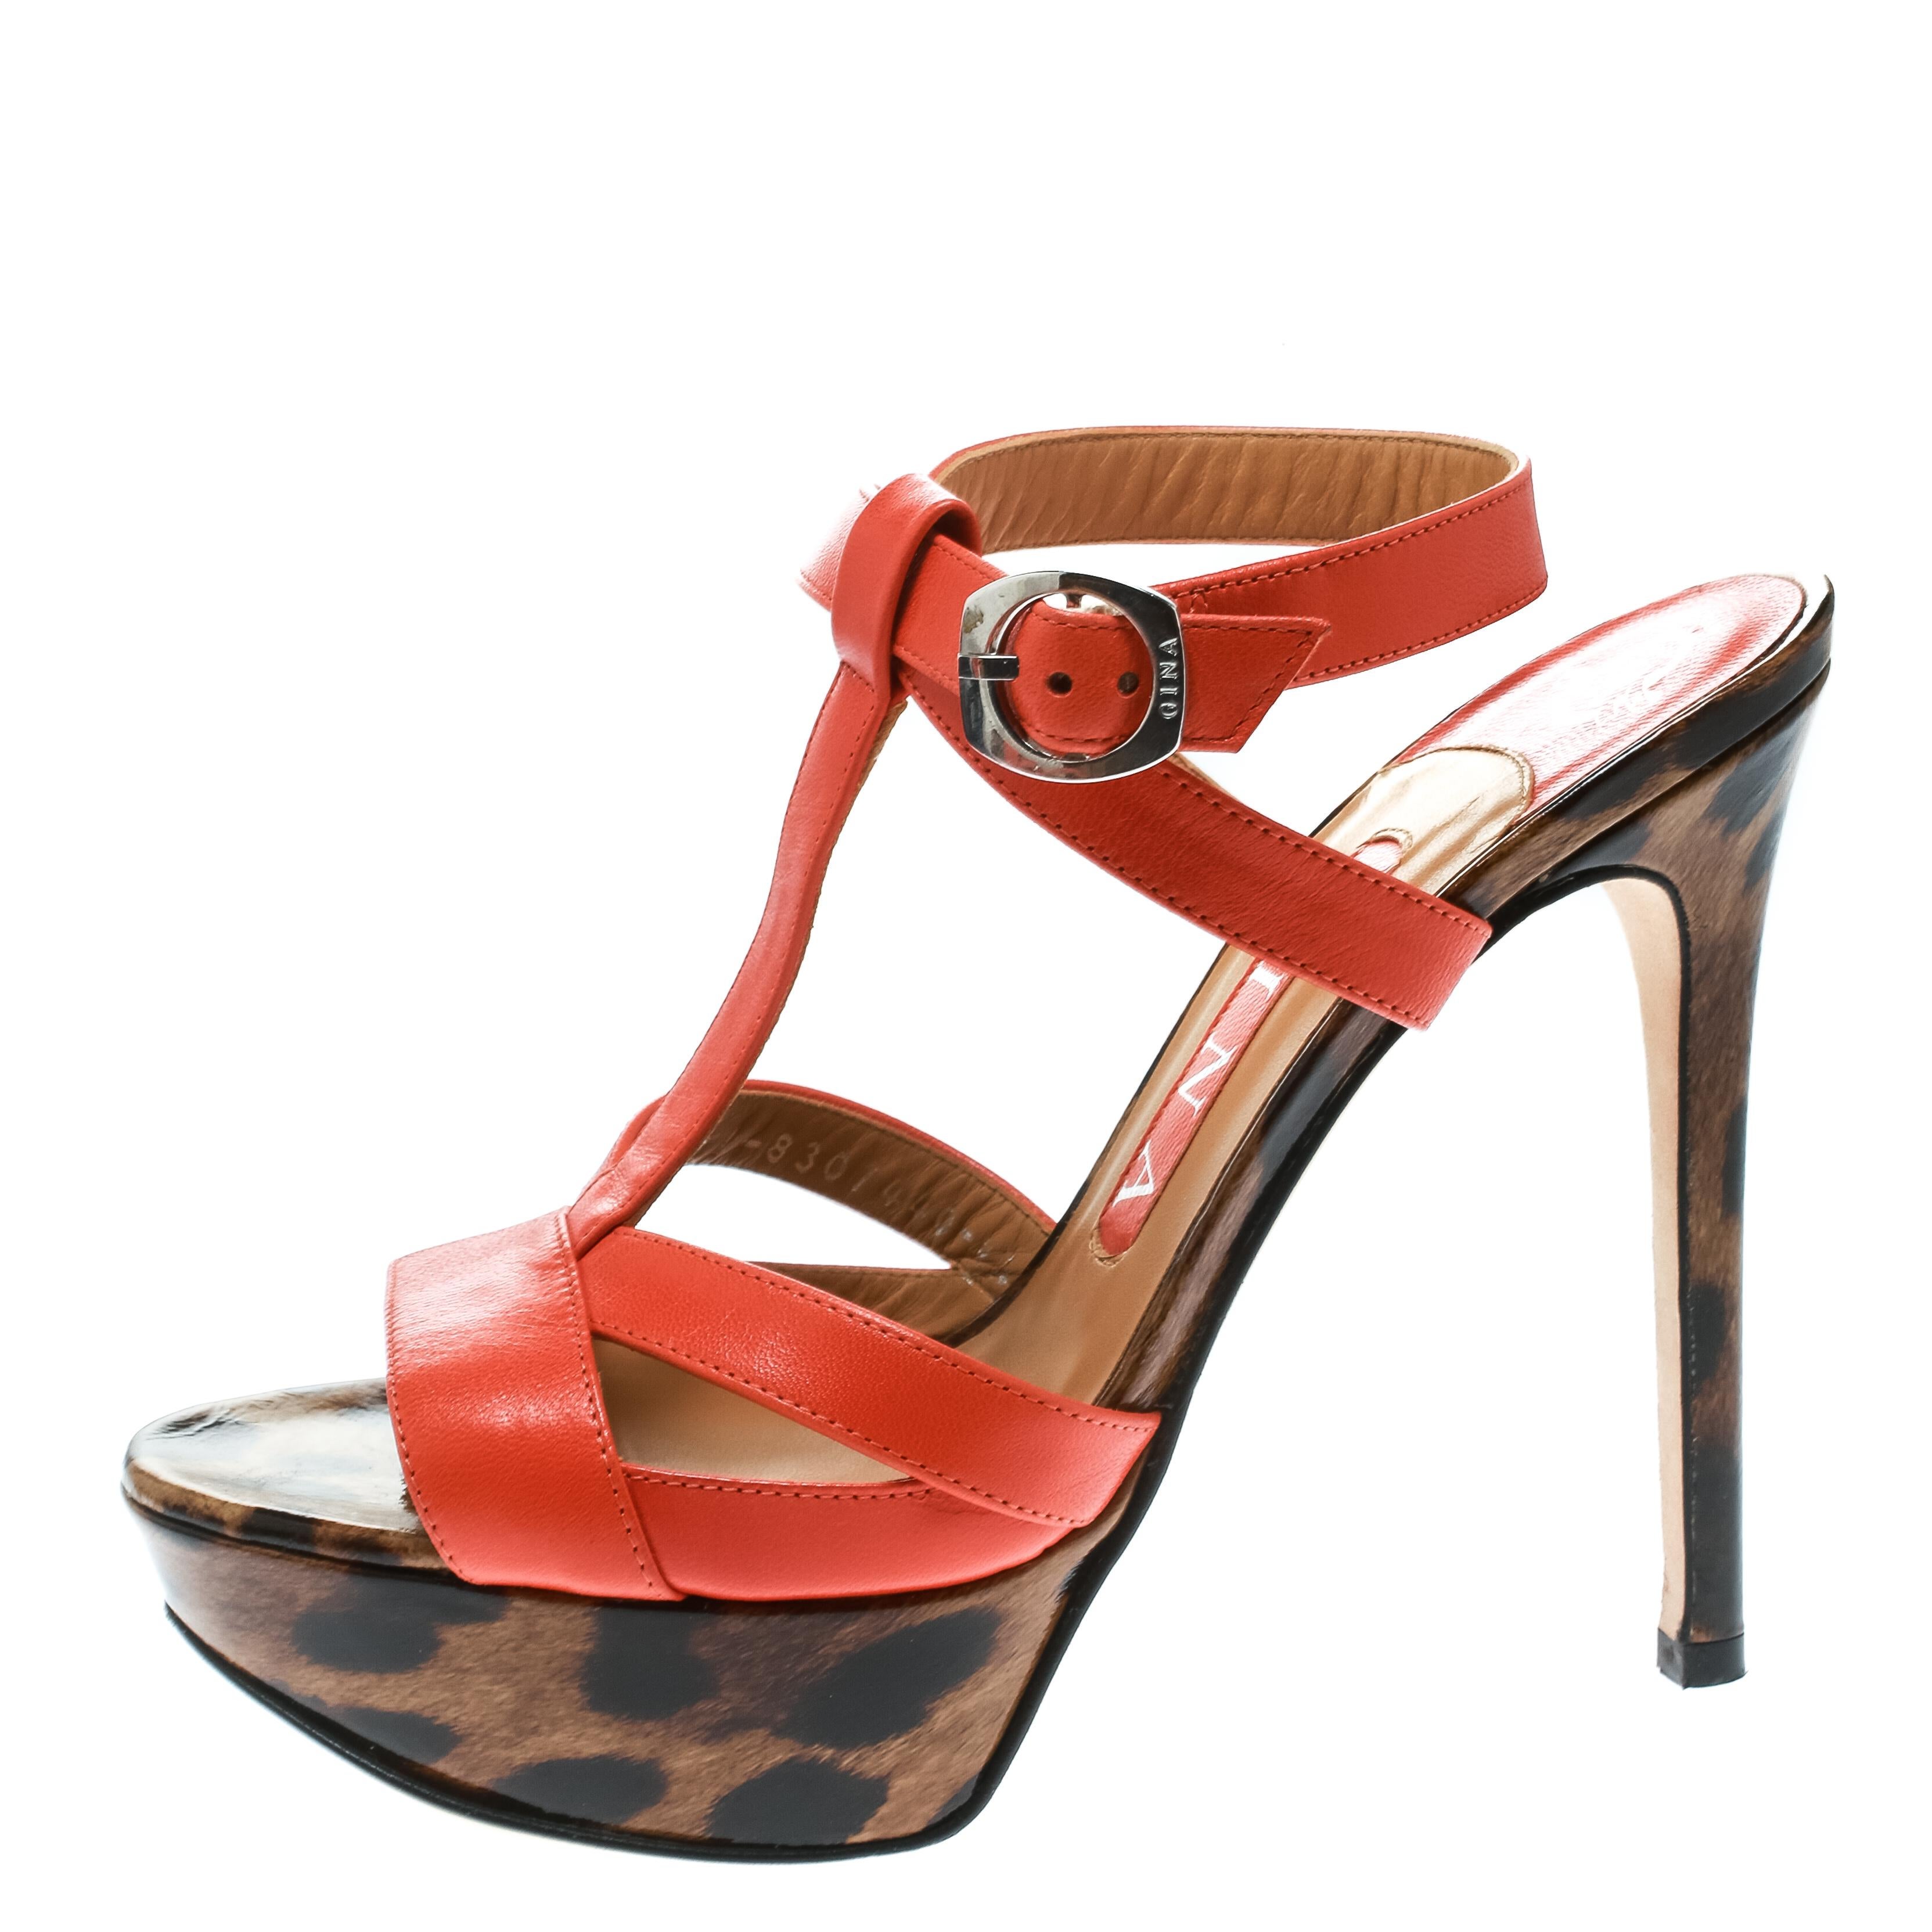 The right shoes do not only make a woman look fabulous but also gives her confidence. These Gina sandals bring elegance and wonder in their design of orange leather straps, ankle buckle fastenings and the leopard print on the platforms and heels.

